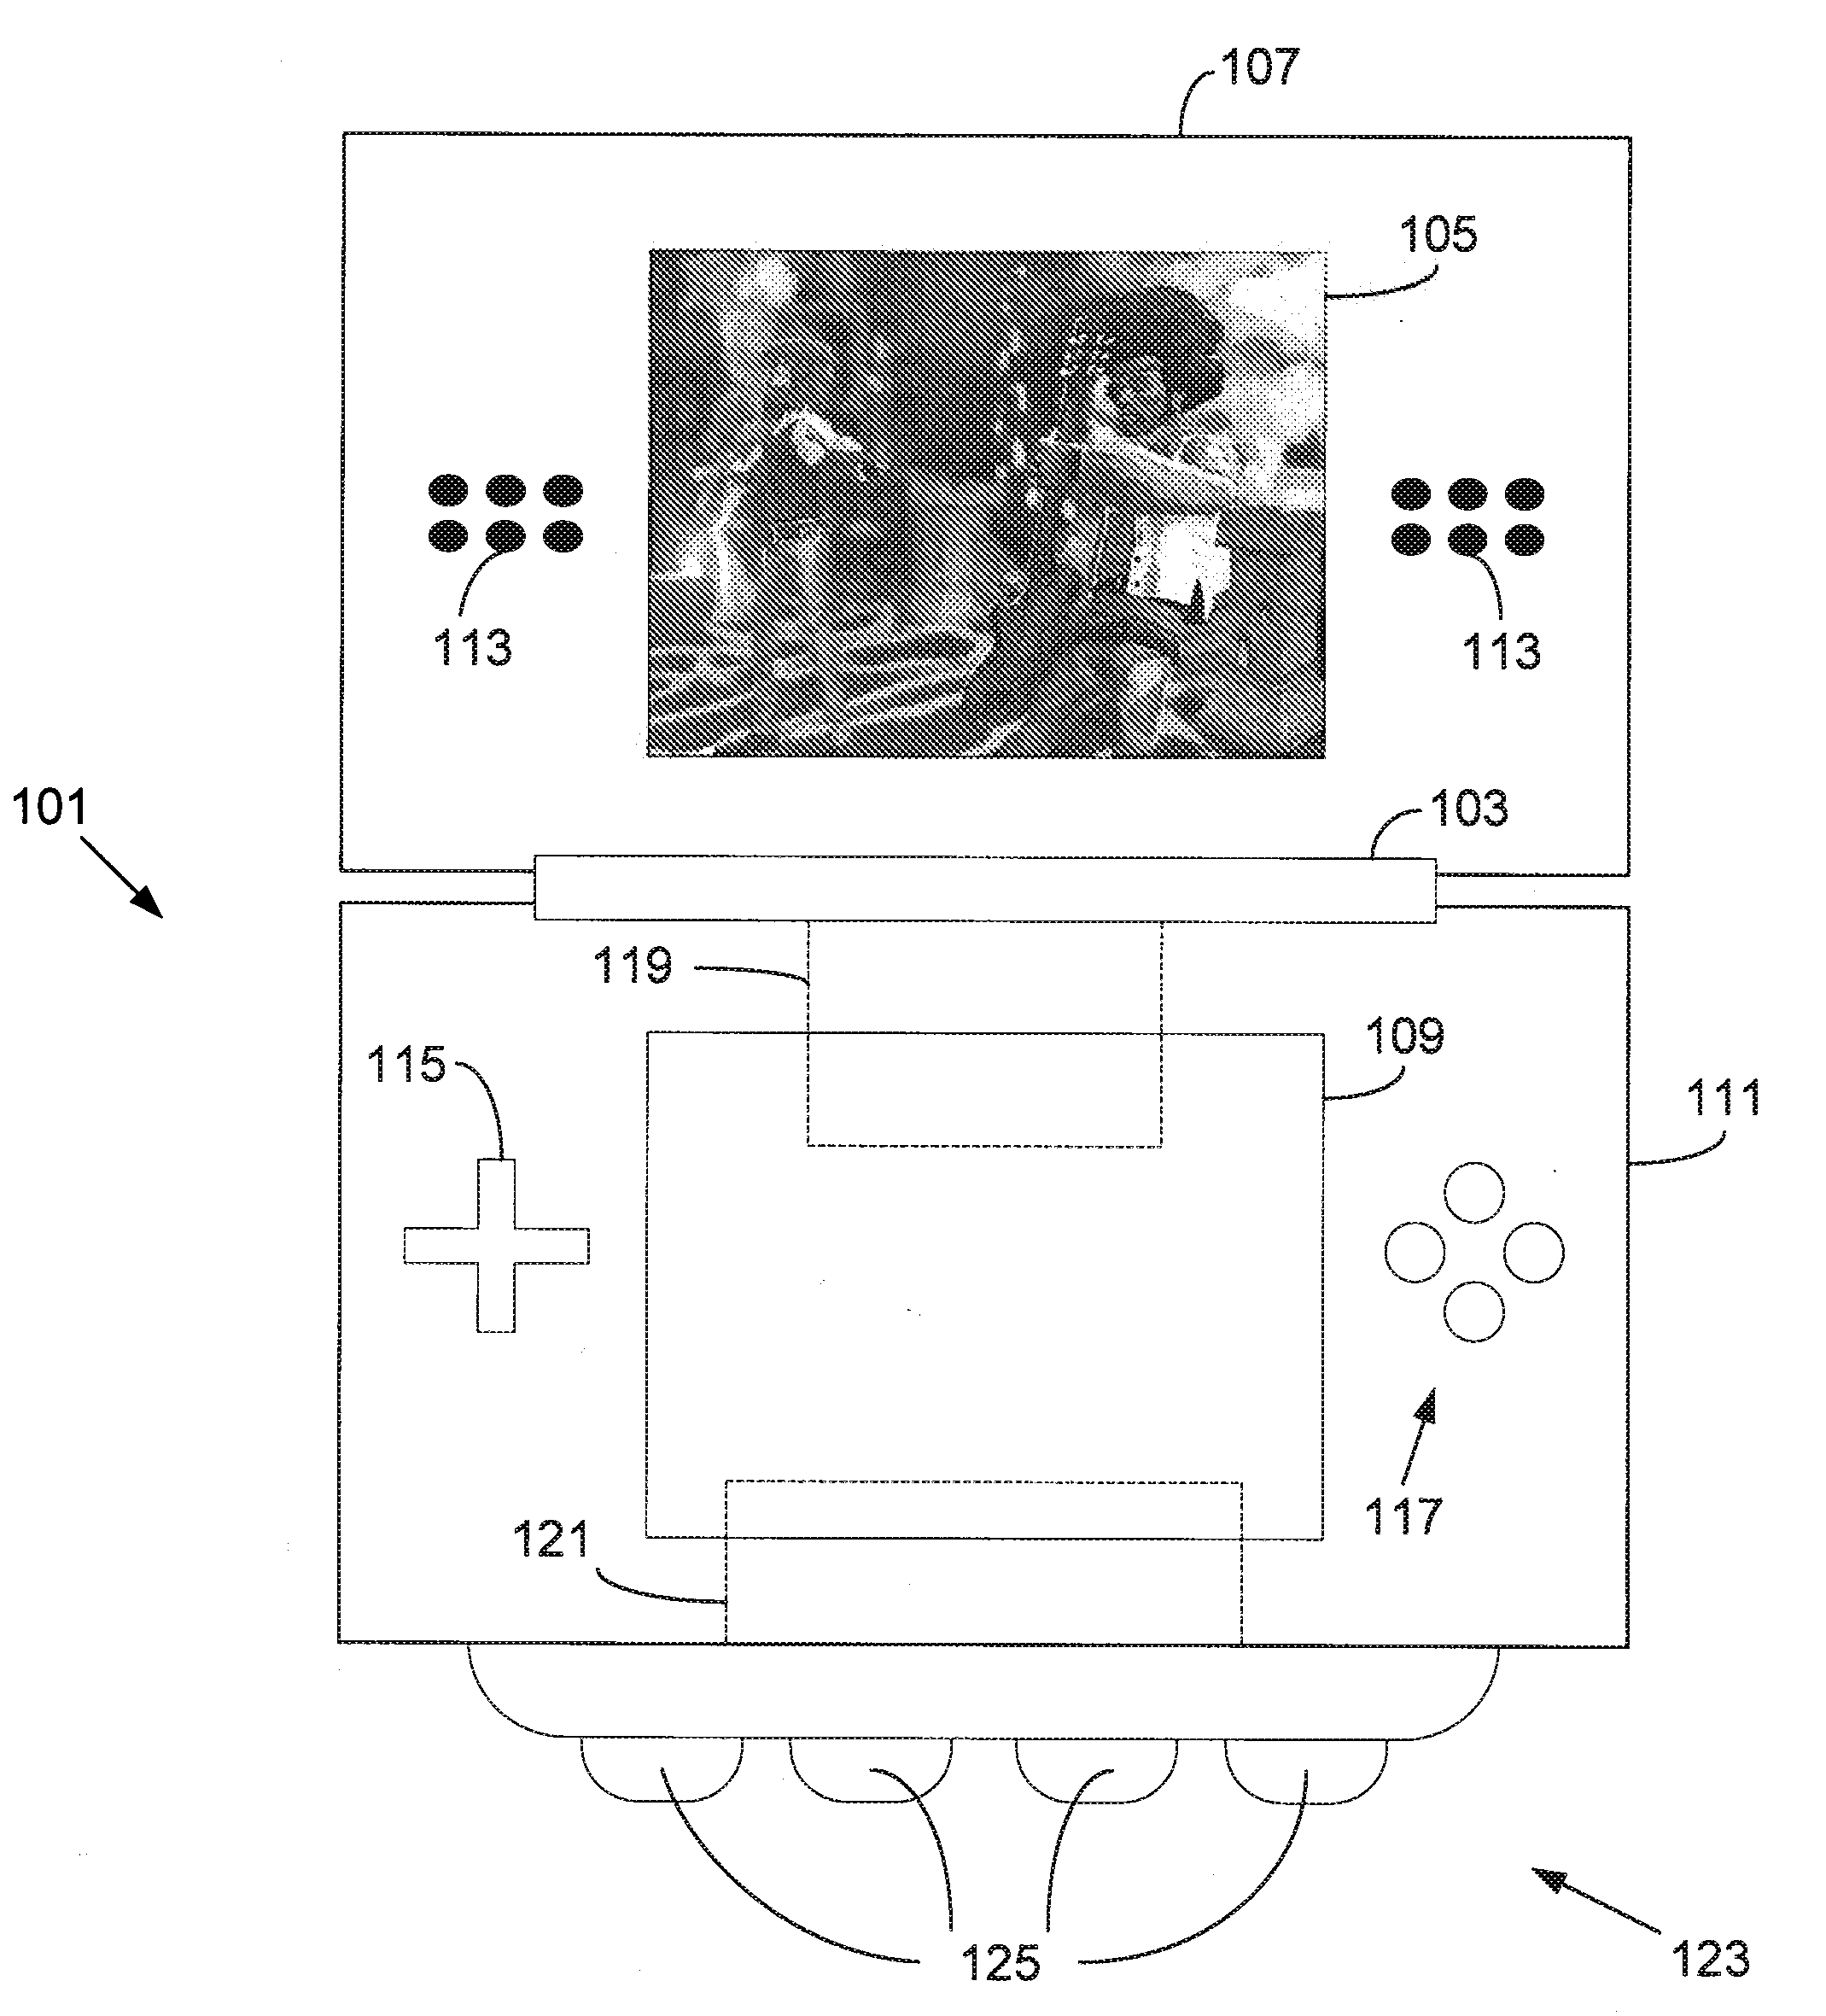 Double render processing for handheld video game device